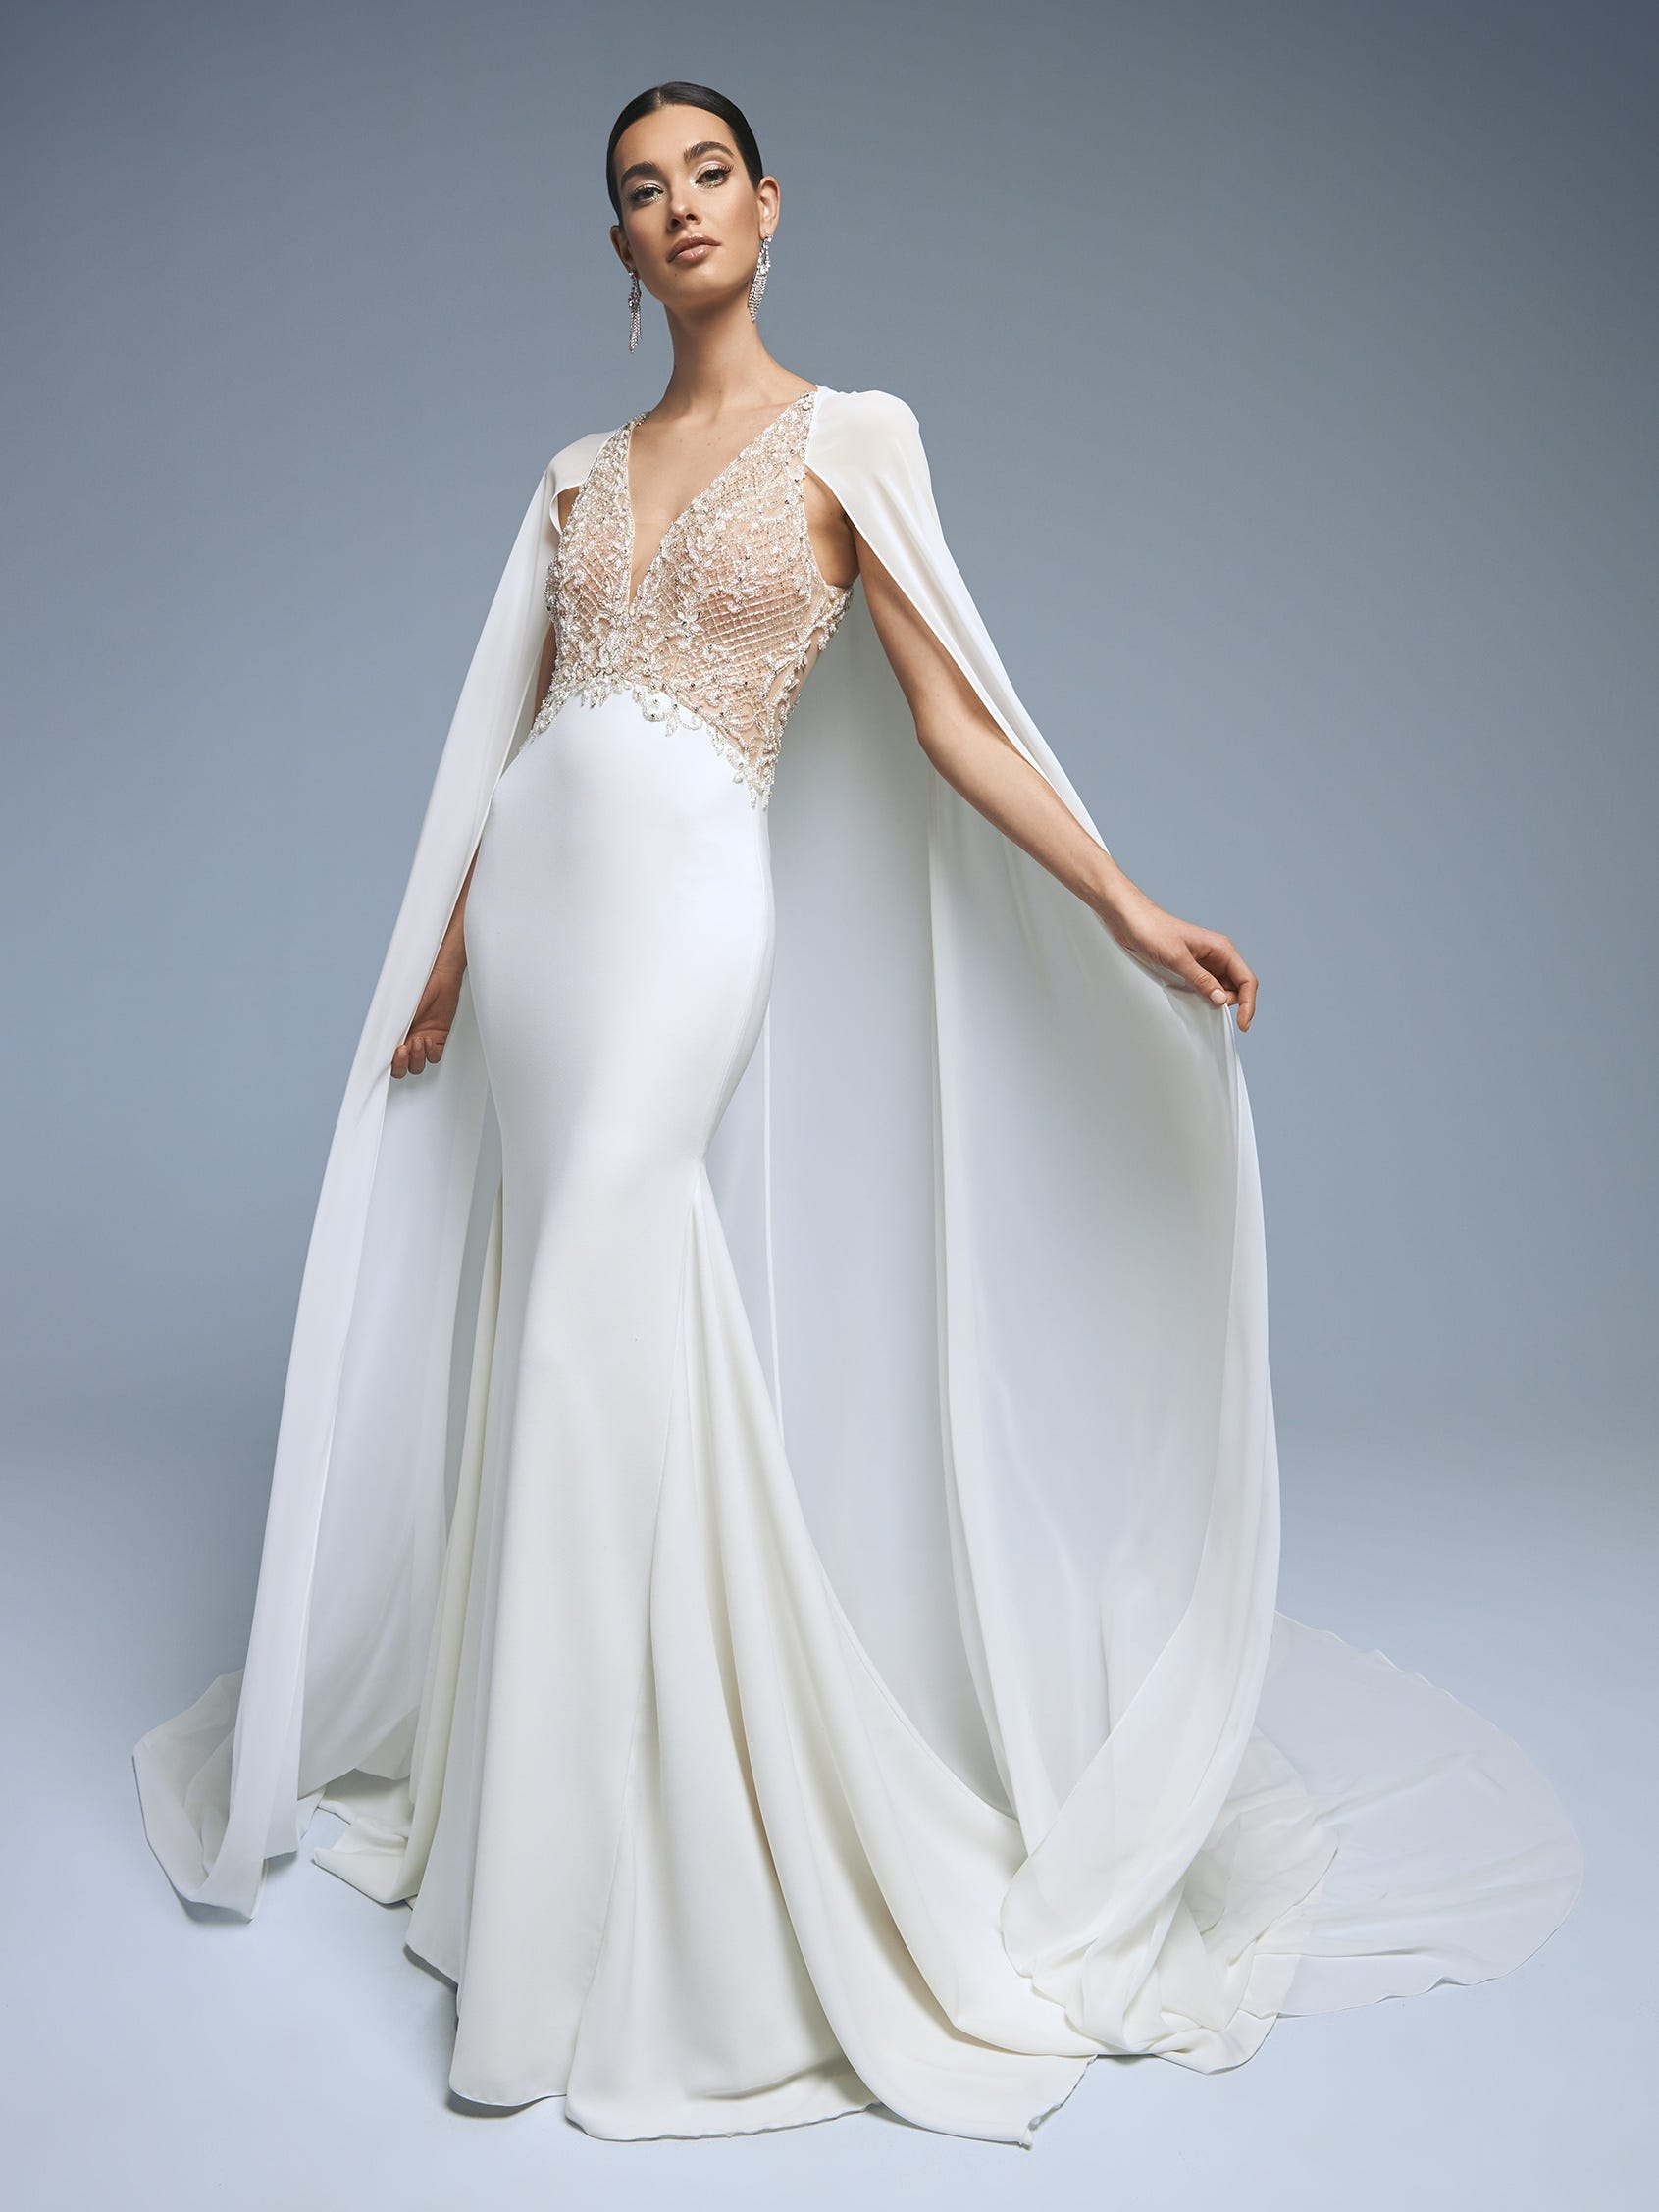 Crepe Mermaid Gown With Beaded Cape Sleeves In Midnight | Adrianna Papell